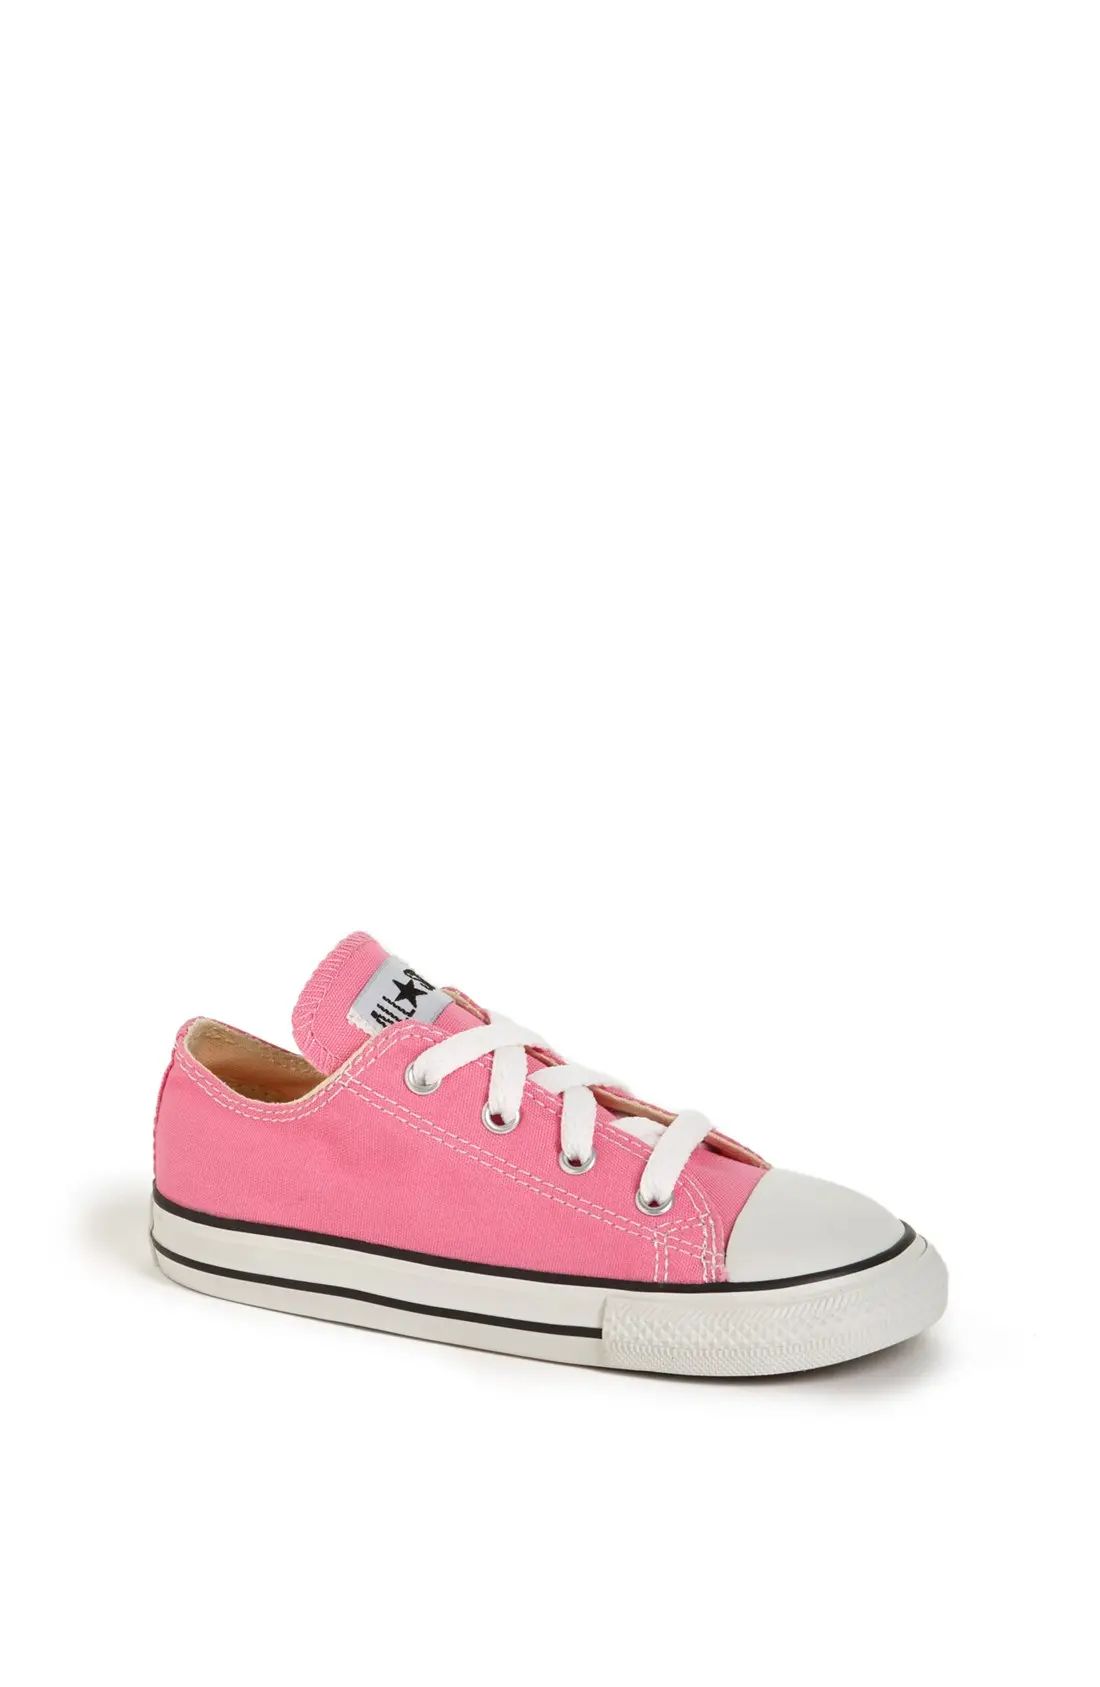 Infant Converse Chuck Taylor Low Top Sneaker, Size 2 M - Pink | Nordstrom